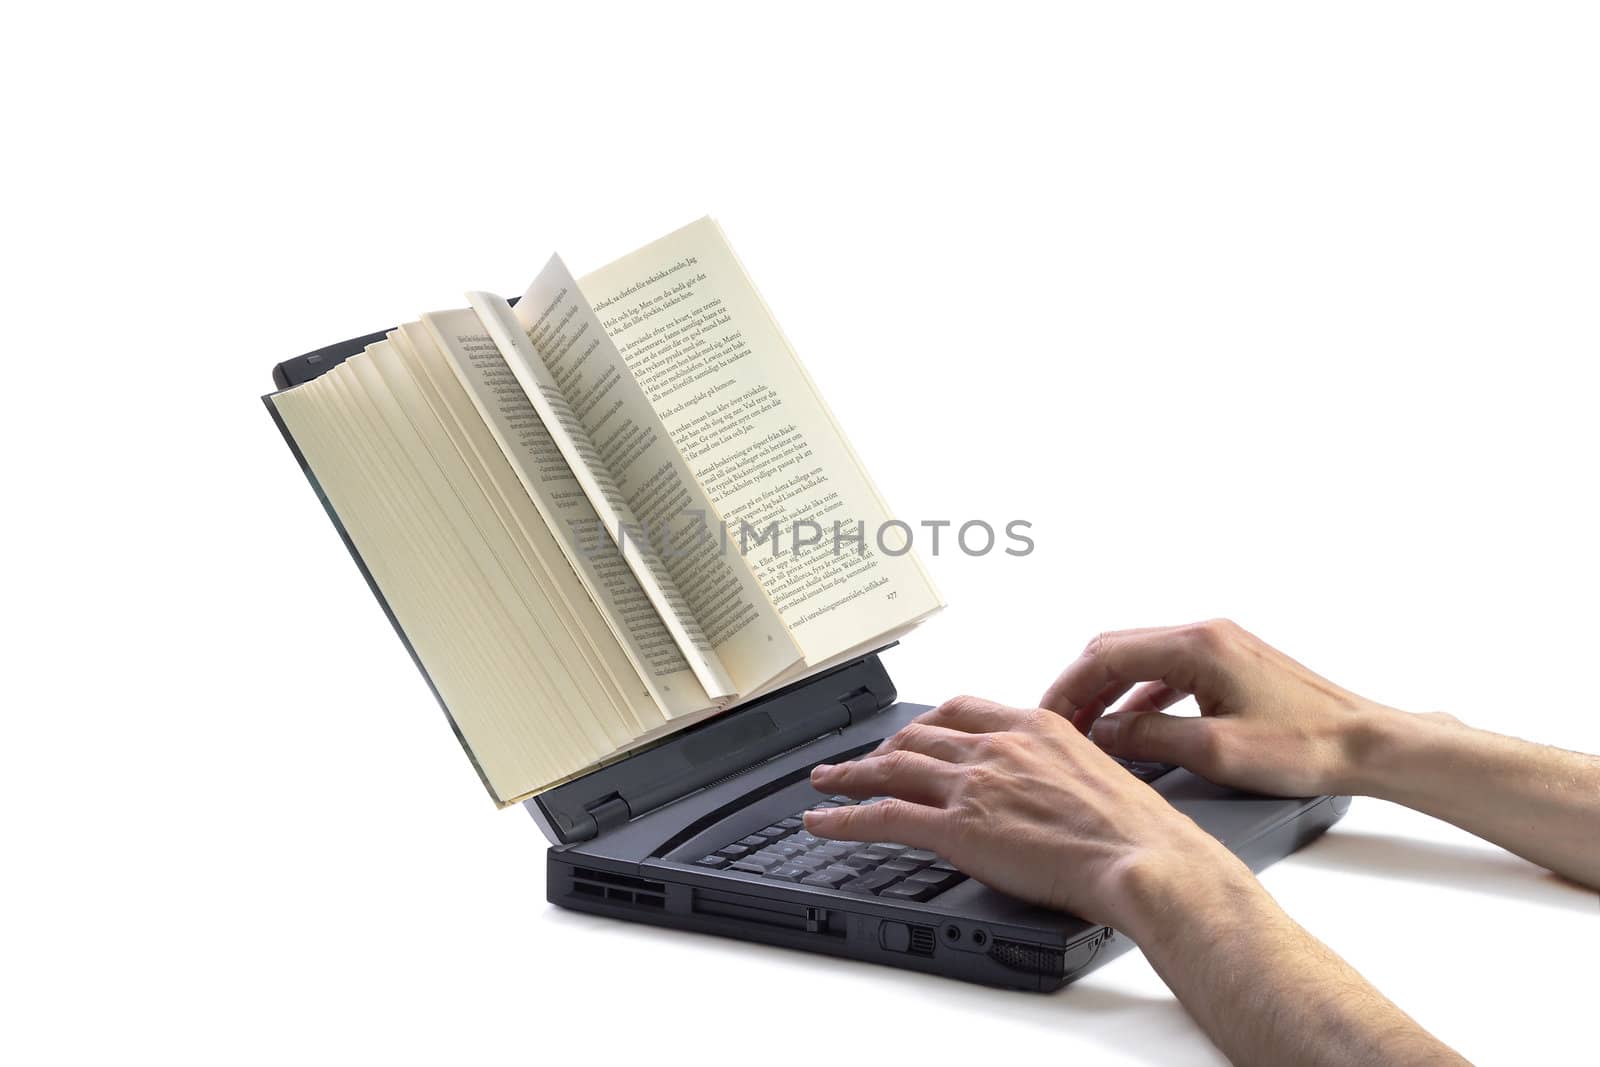 Book on computer screen and hands typing the keyboard suggesting the concept of writing online.